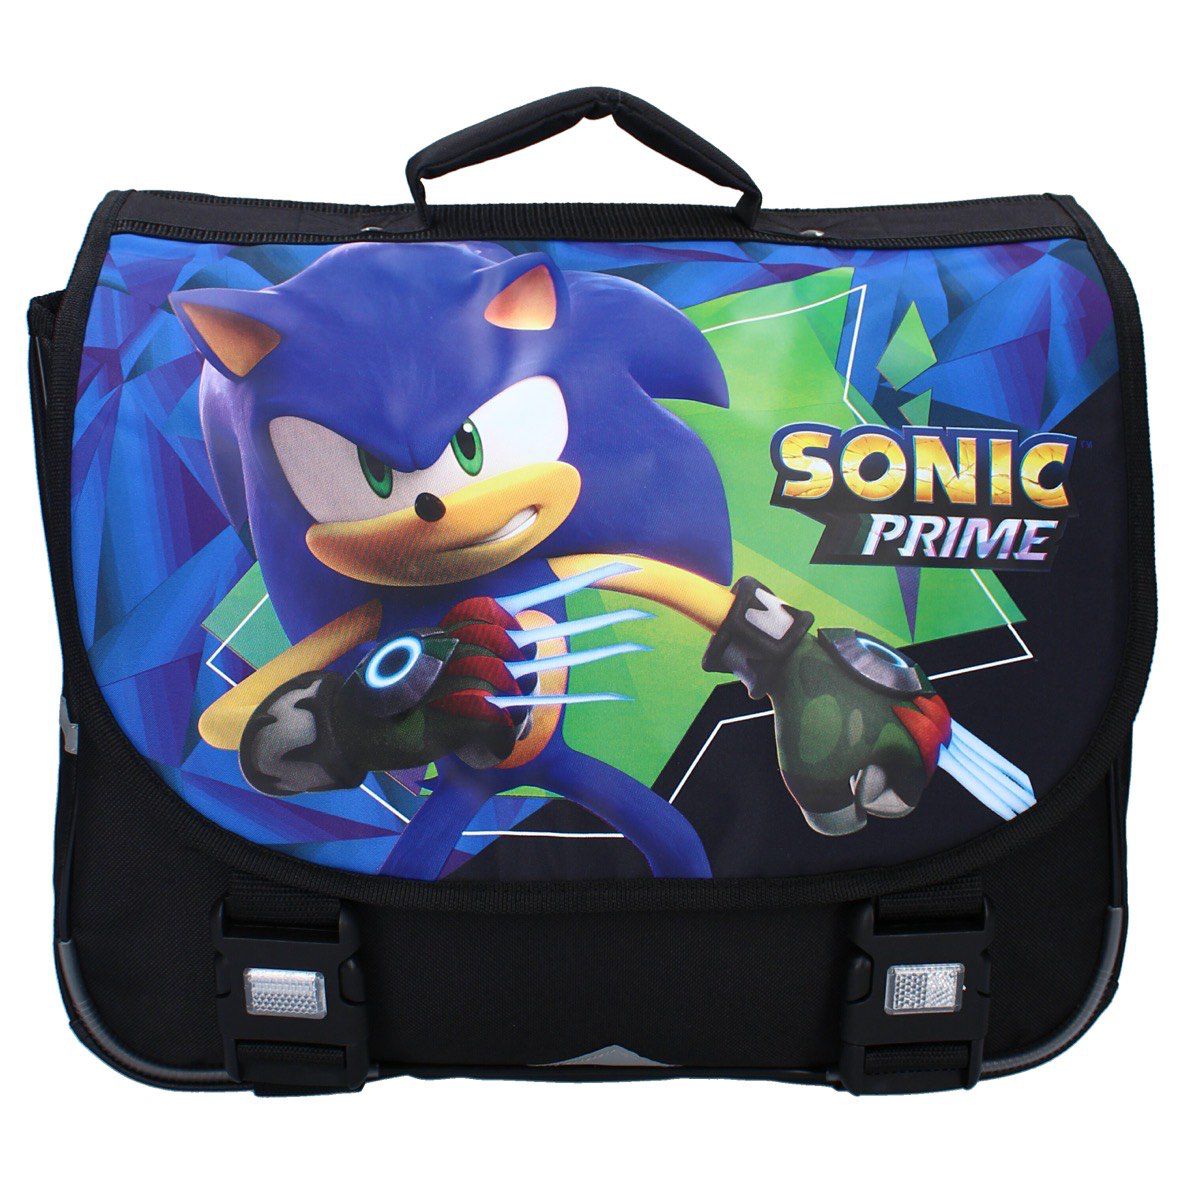 Cartable SONIC 2 compartiments